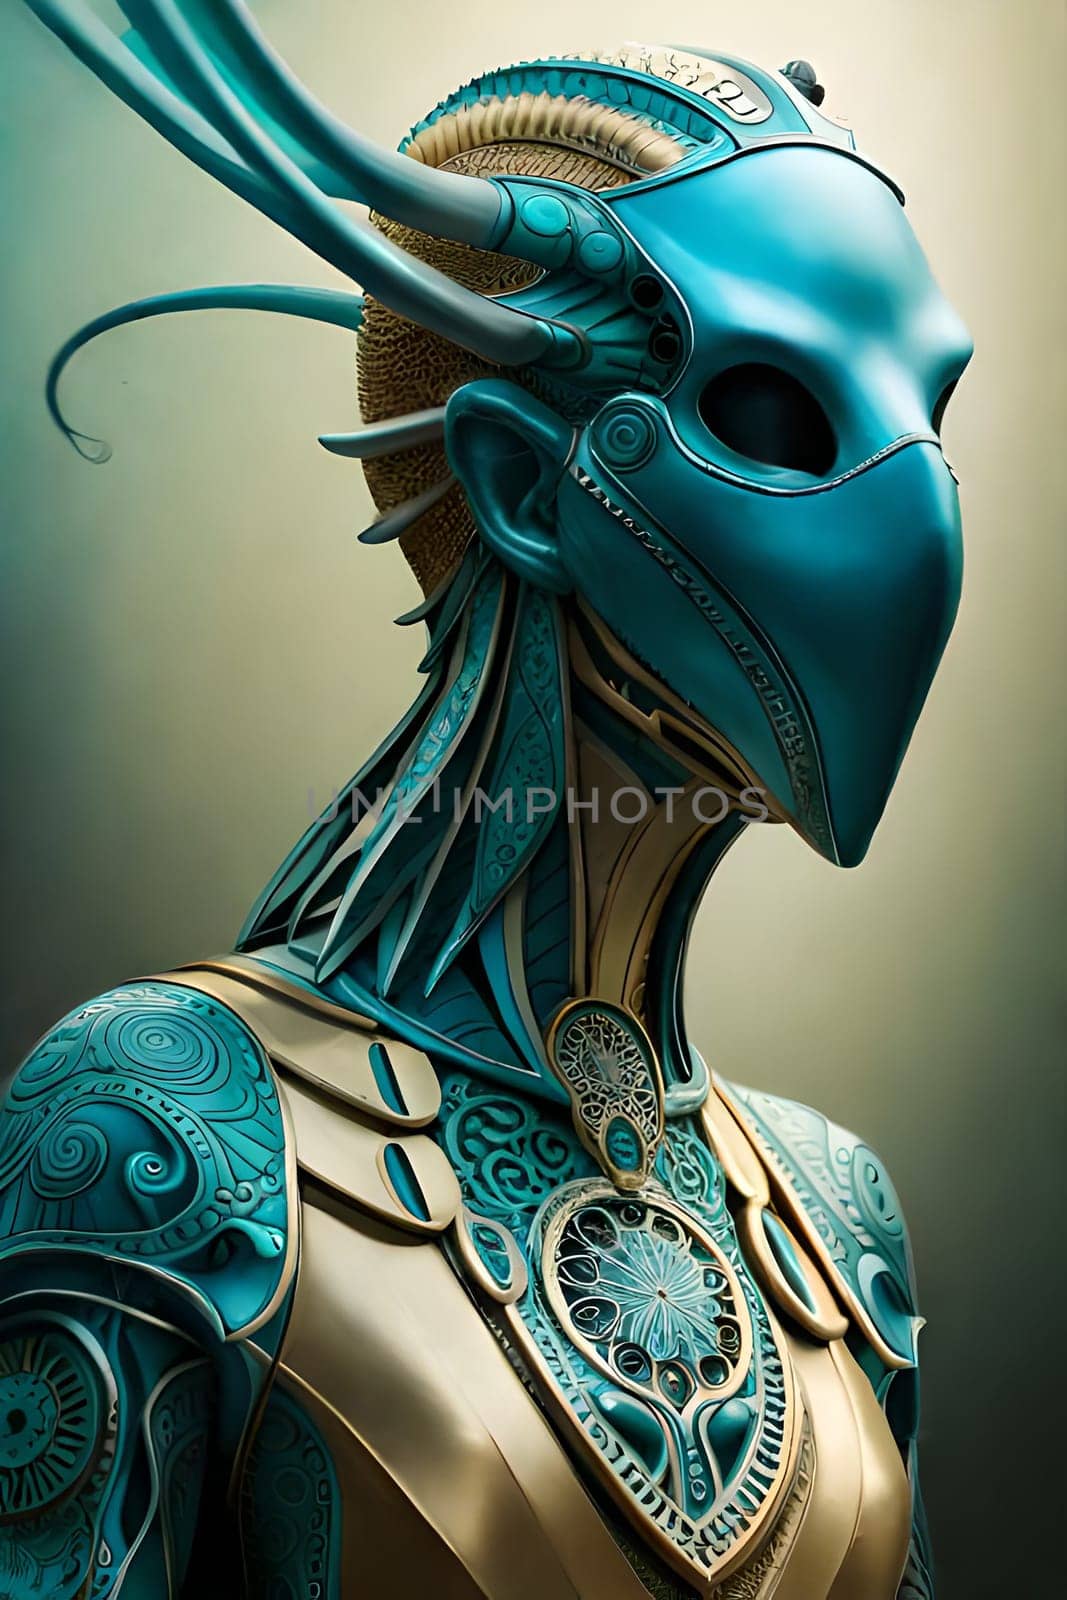 A painting of a man with a blue mask and horns. Digital painting illustration